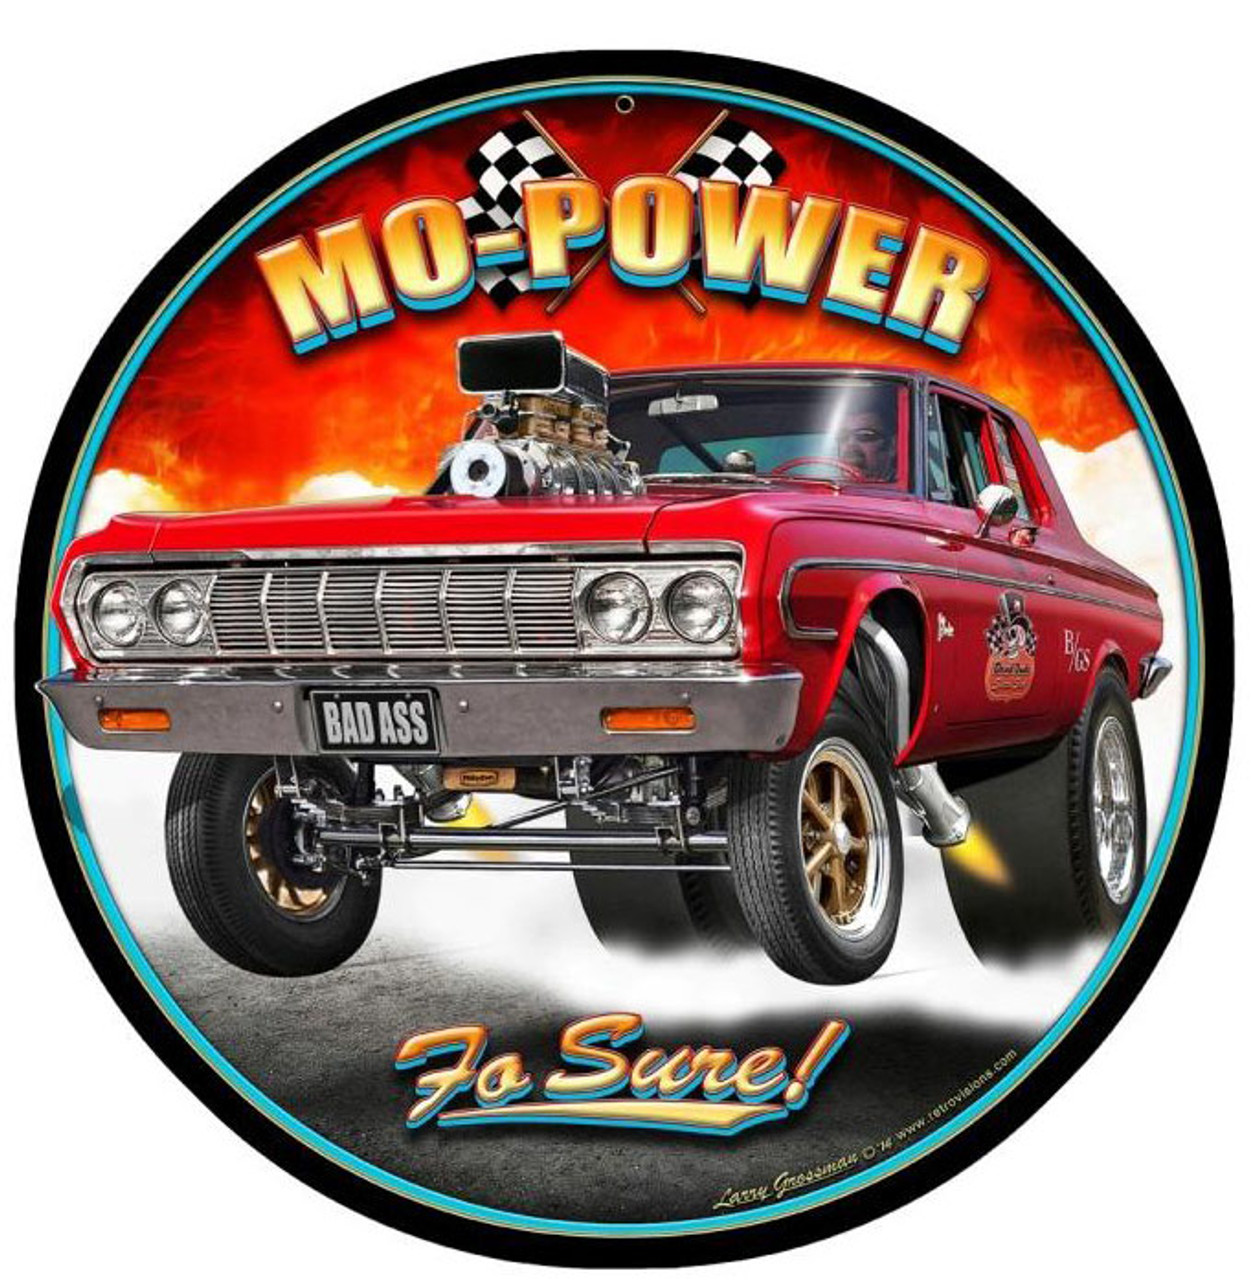 Mo Power Round Metal Sign 14 x 14 Inches